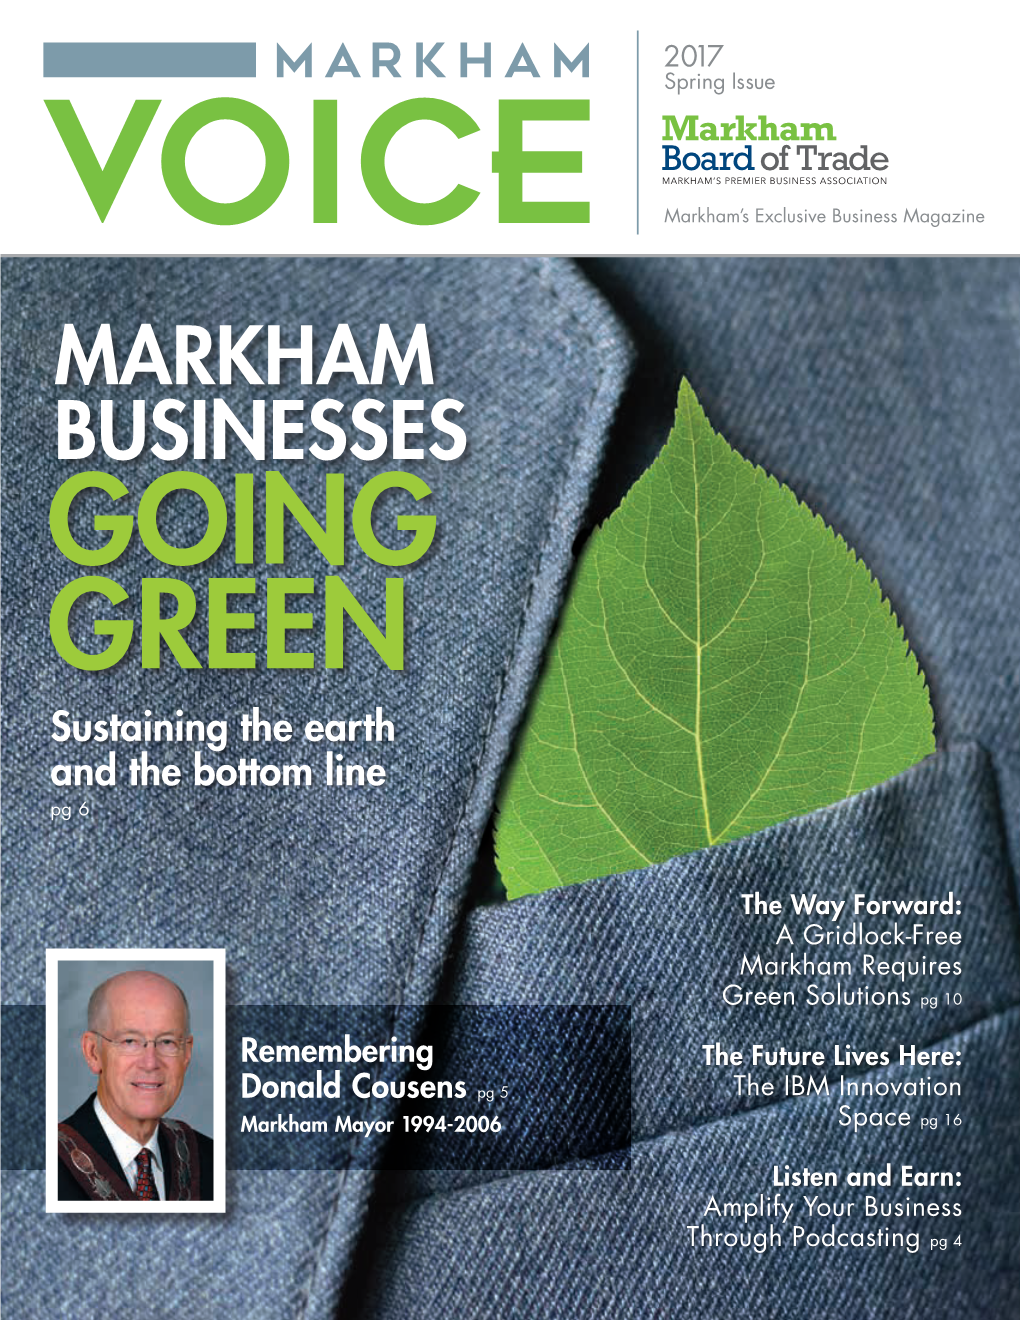 MARKHAM BUSINESSES GOING GREEN Sustaining the Earth and the Bottom Line Pg 6